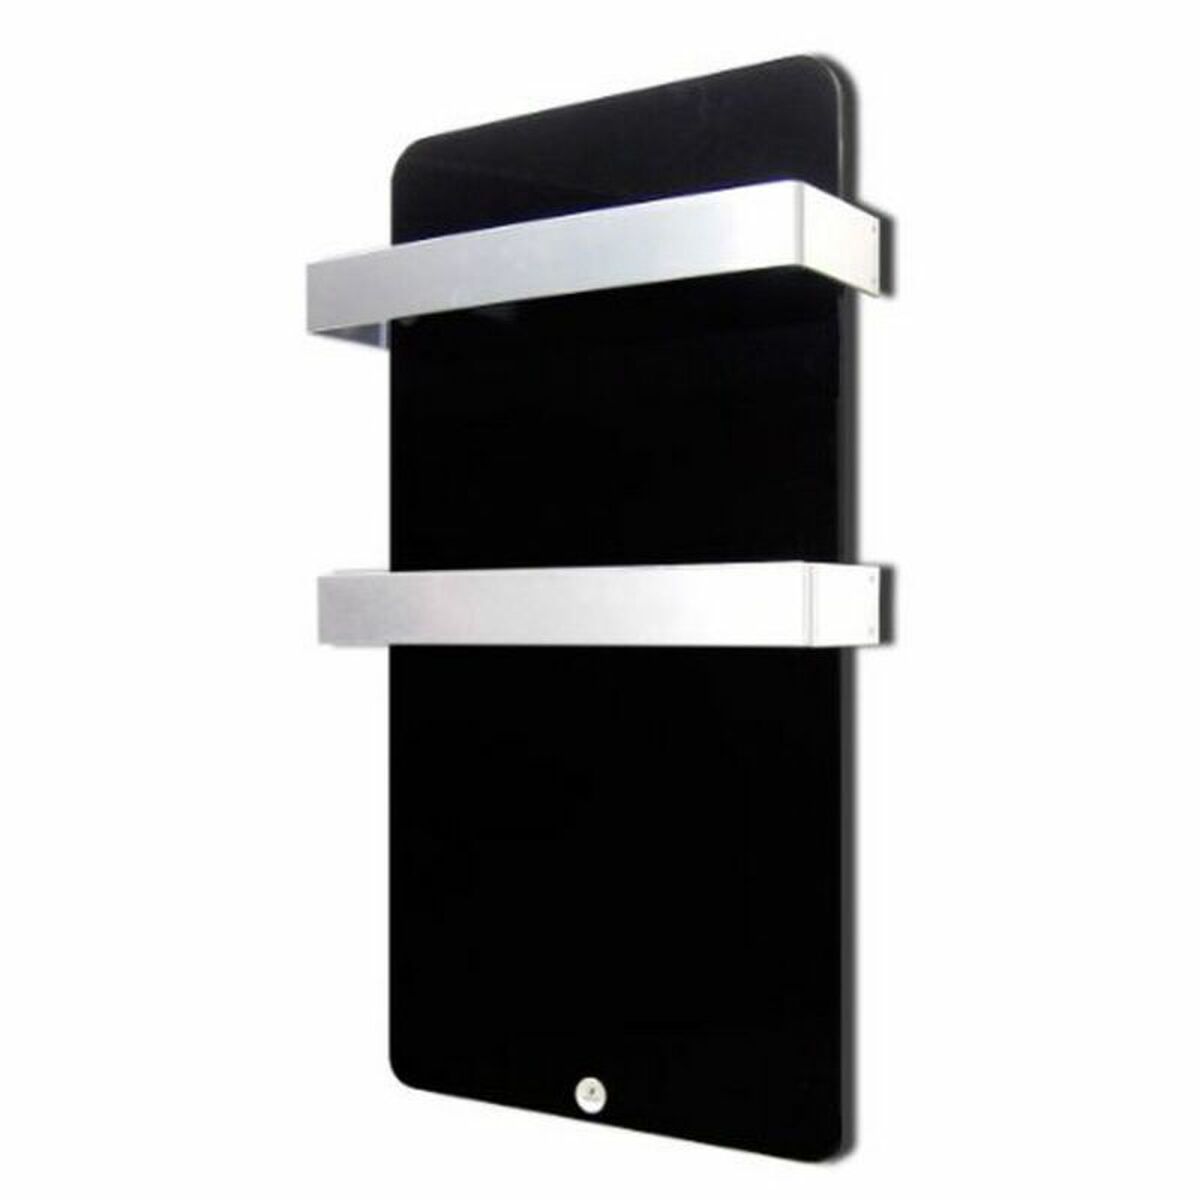 Towel Rail Haverland XTAL4N Black 400 W, Haverland, Home and cooking, Bath, towel-rail-haverland-xtal4n-black-400-w, Brand_Haverland, category-reference-2609, category-reference-2617, category-reference-2619, category-reference-t-19656, category-reference-t-2184, category-reference-t-2185, Condition_NEW, Price_500 - 600, RiotNook